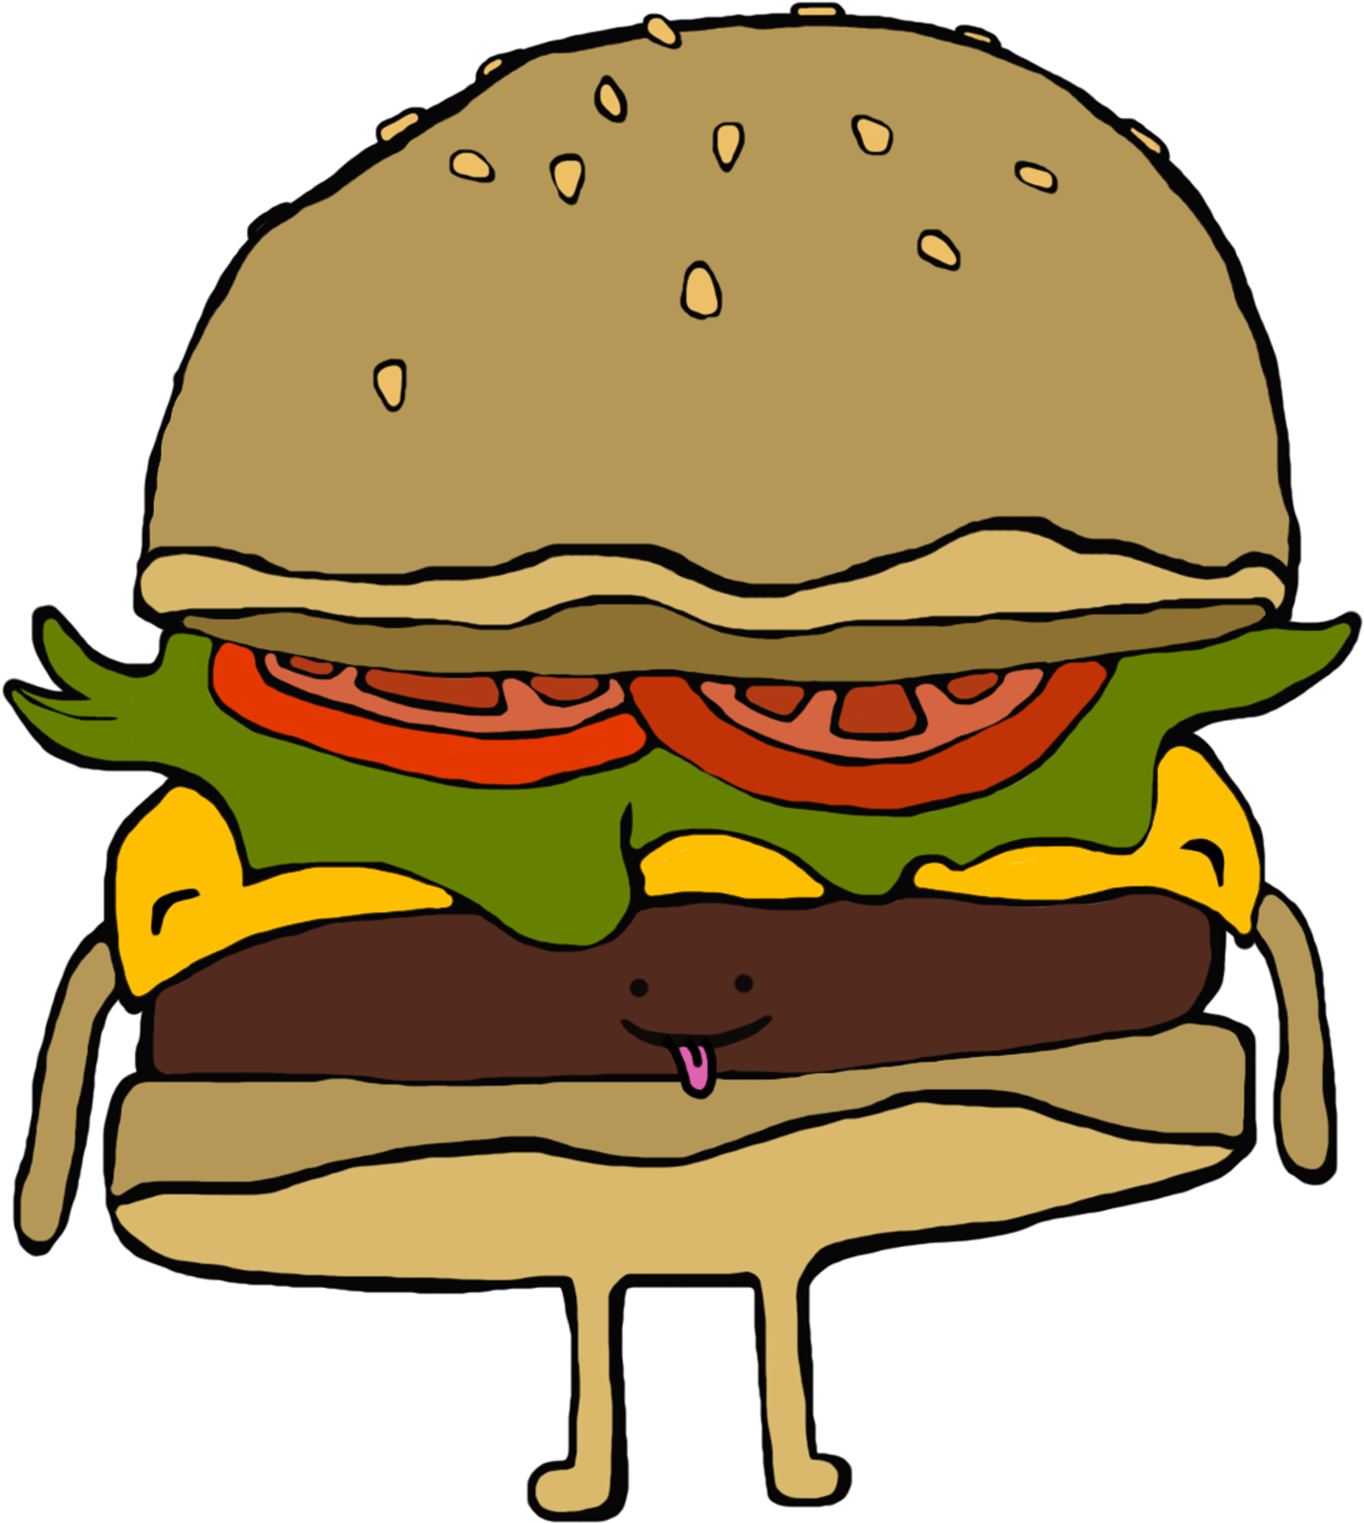 At The Moment There Are Only Four Characters For Cute - Cheeseburger (1400x2141)